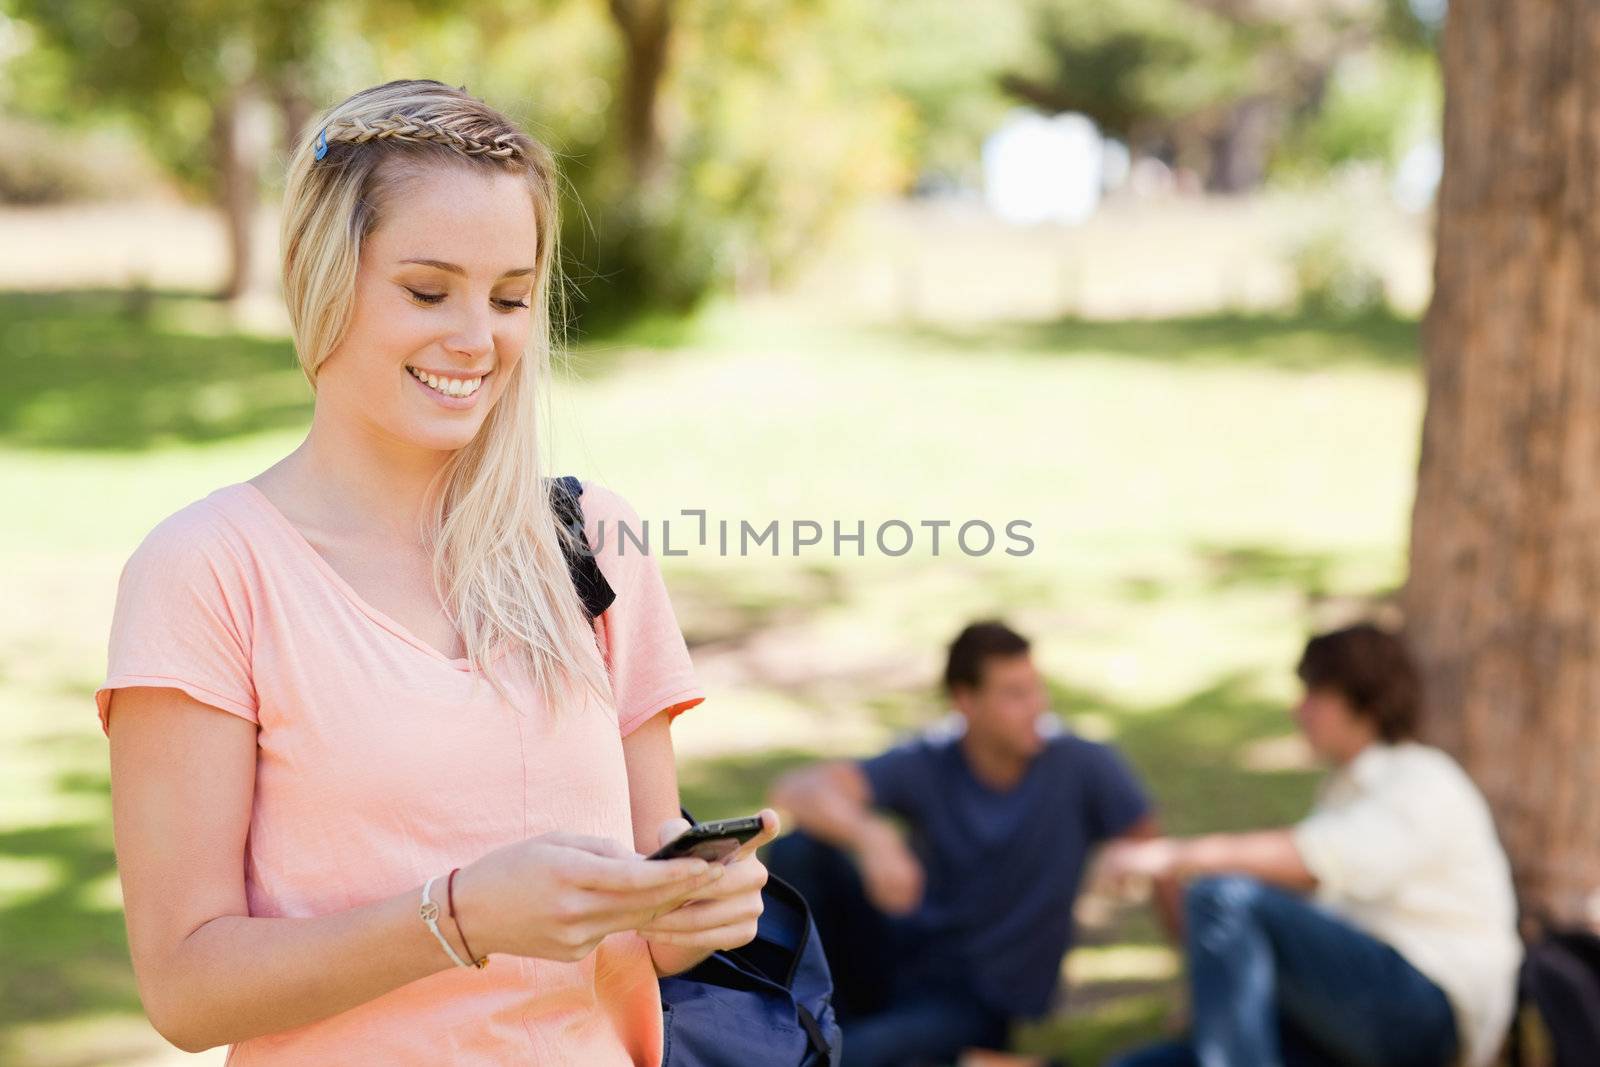 Close-up of a smiling girl using a smartphone in a park with friends in background